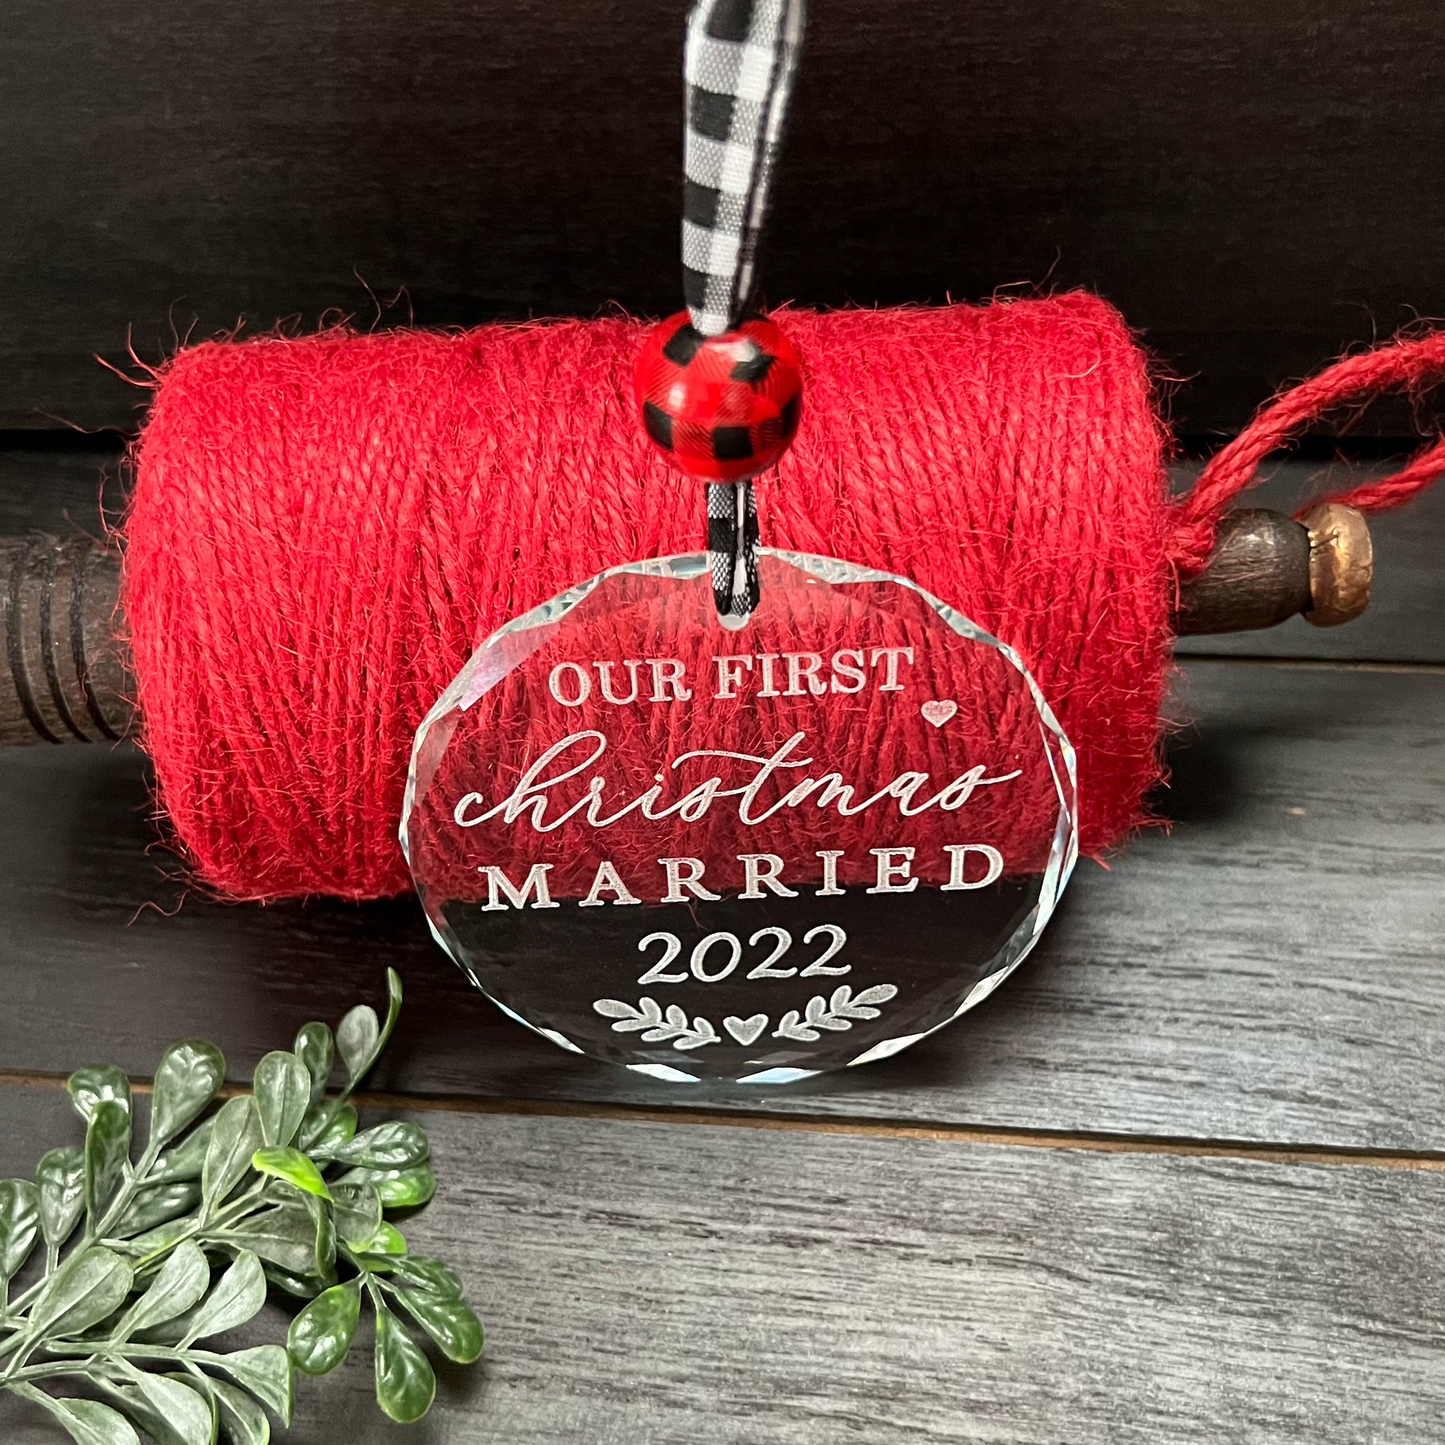 Our First Christmas married glass ornament - River Barn Designs